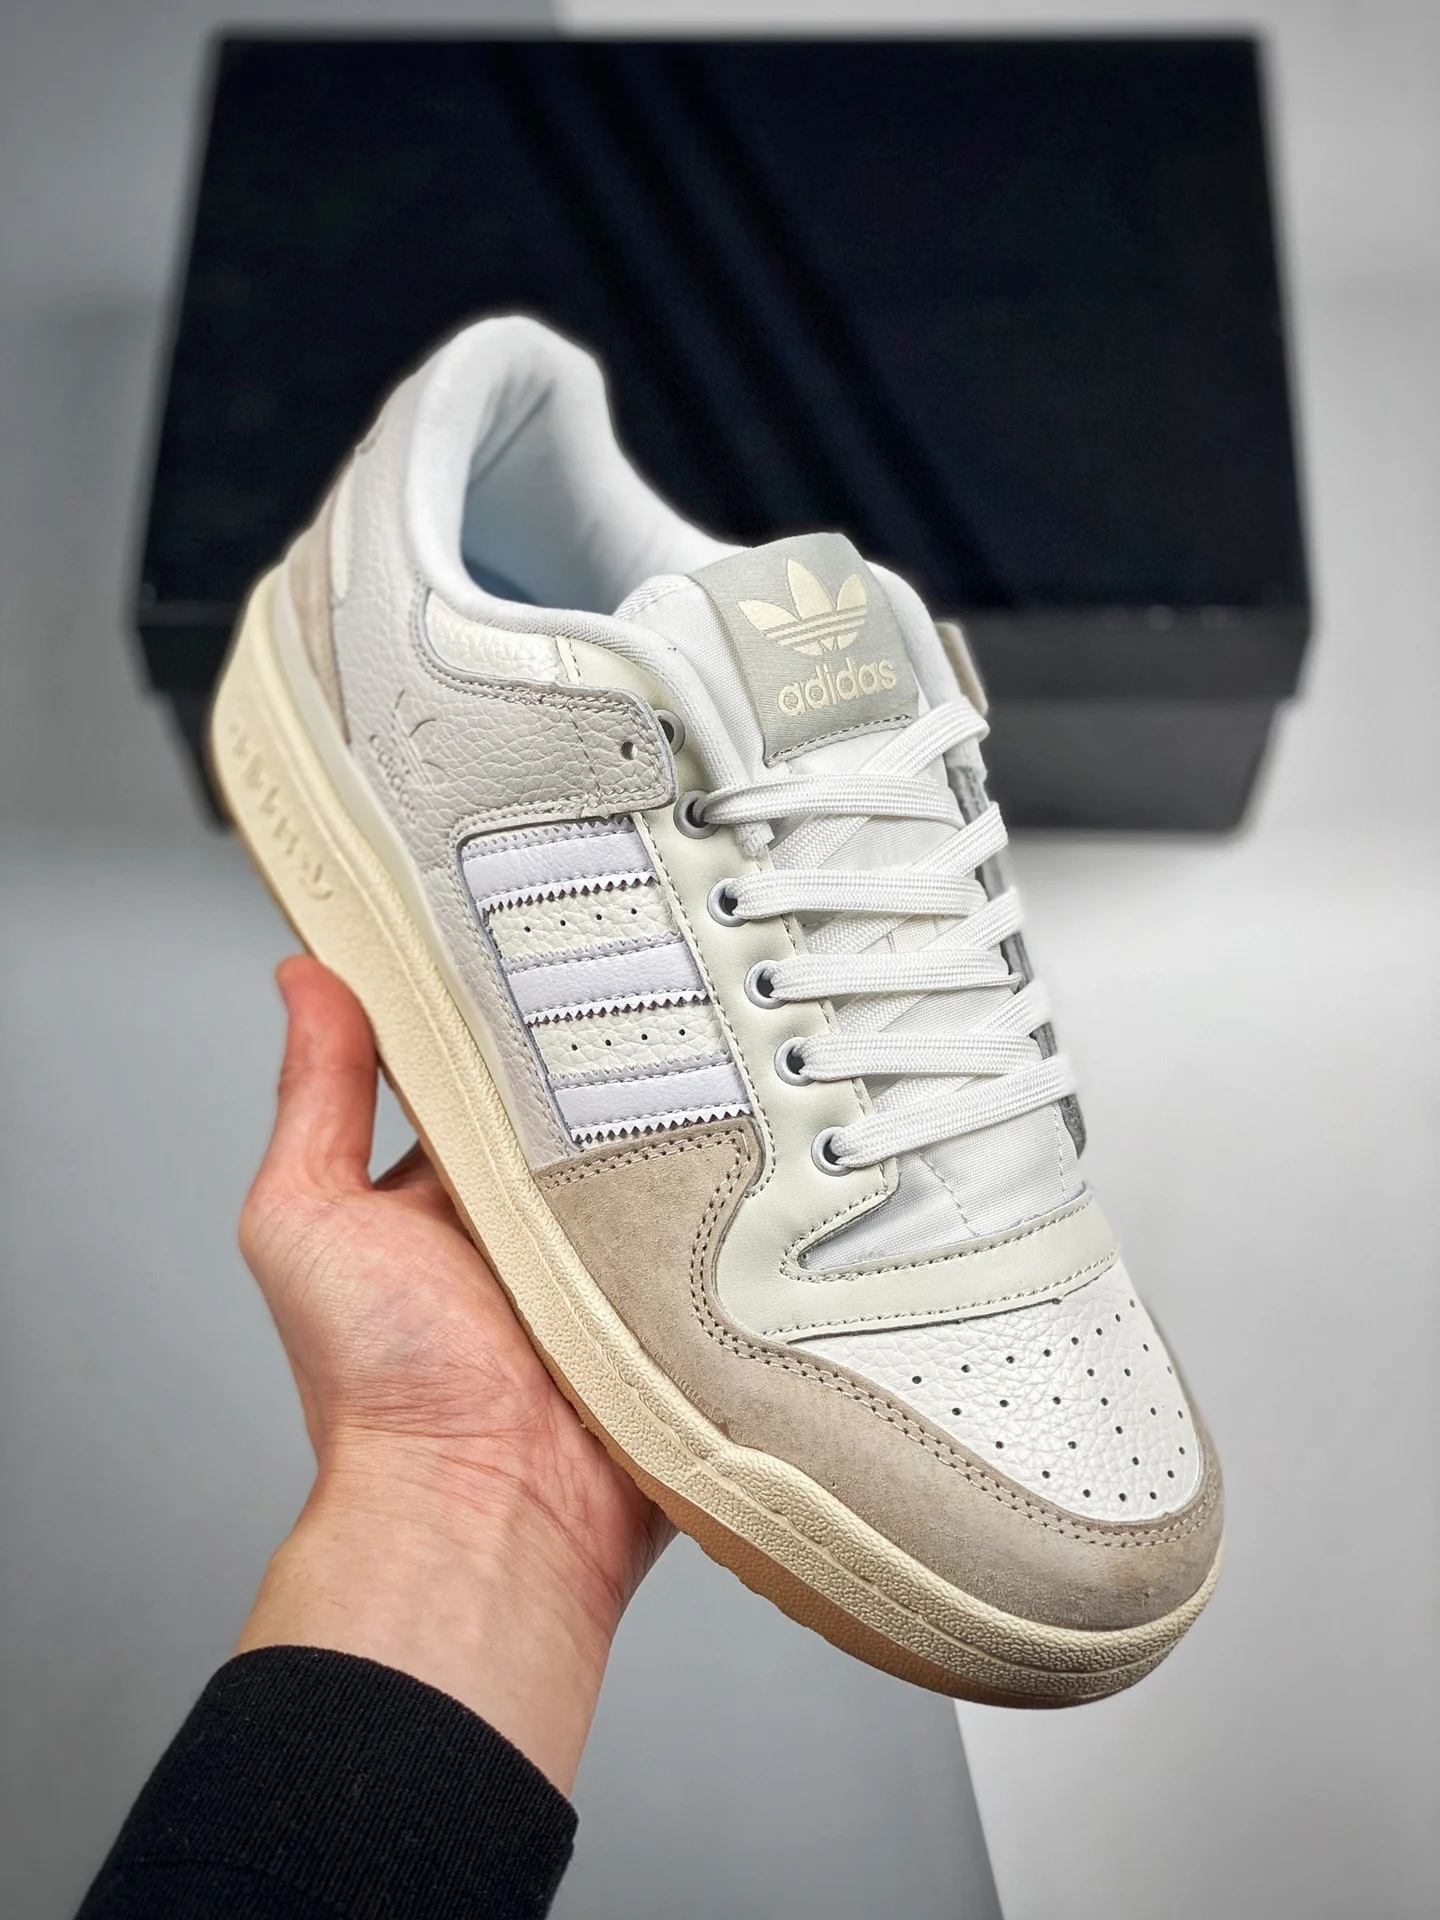 Adidas Forum 84 Low ADV White FY7998 For Sale